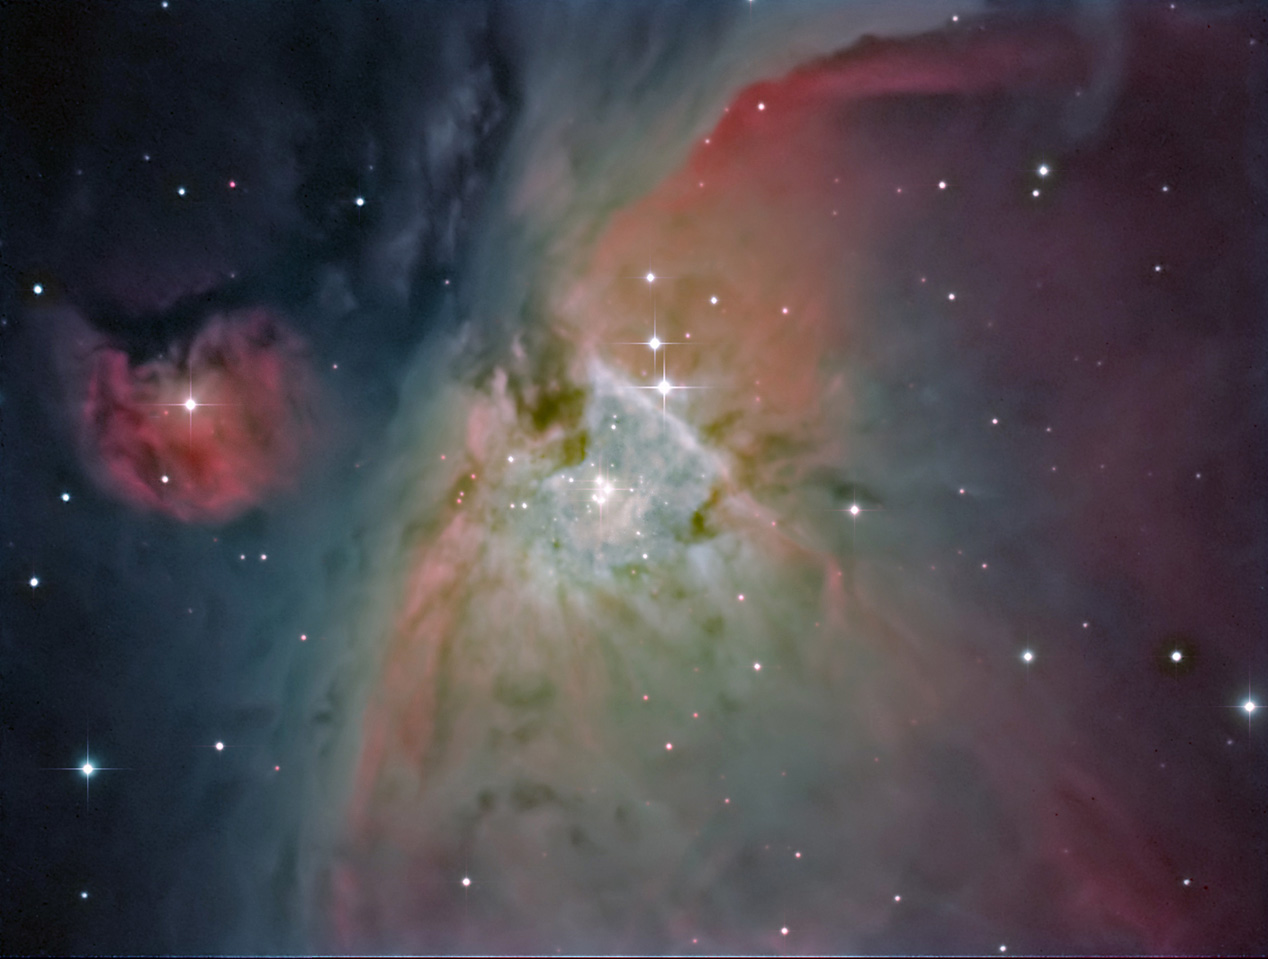 The core of M42